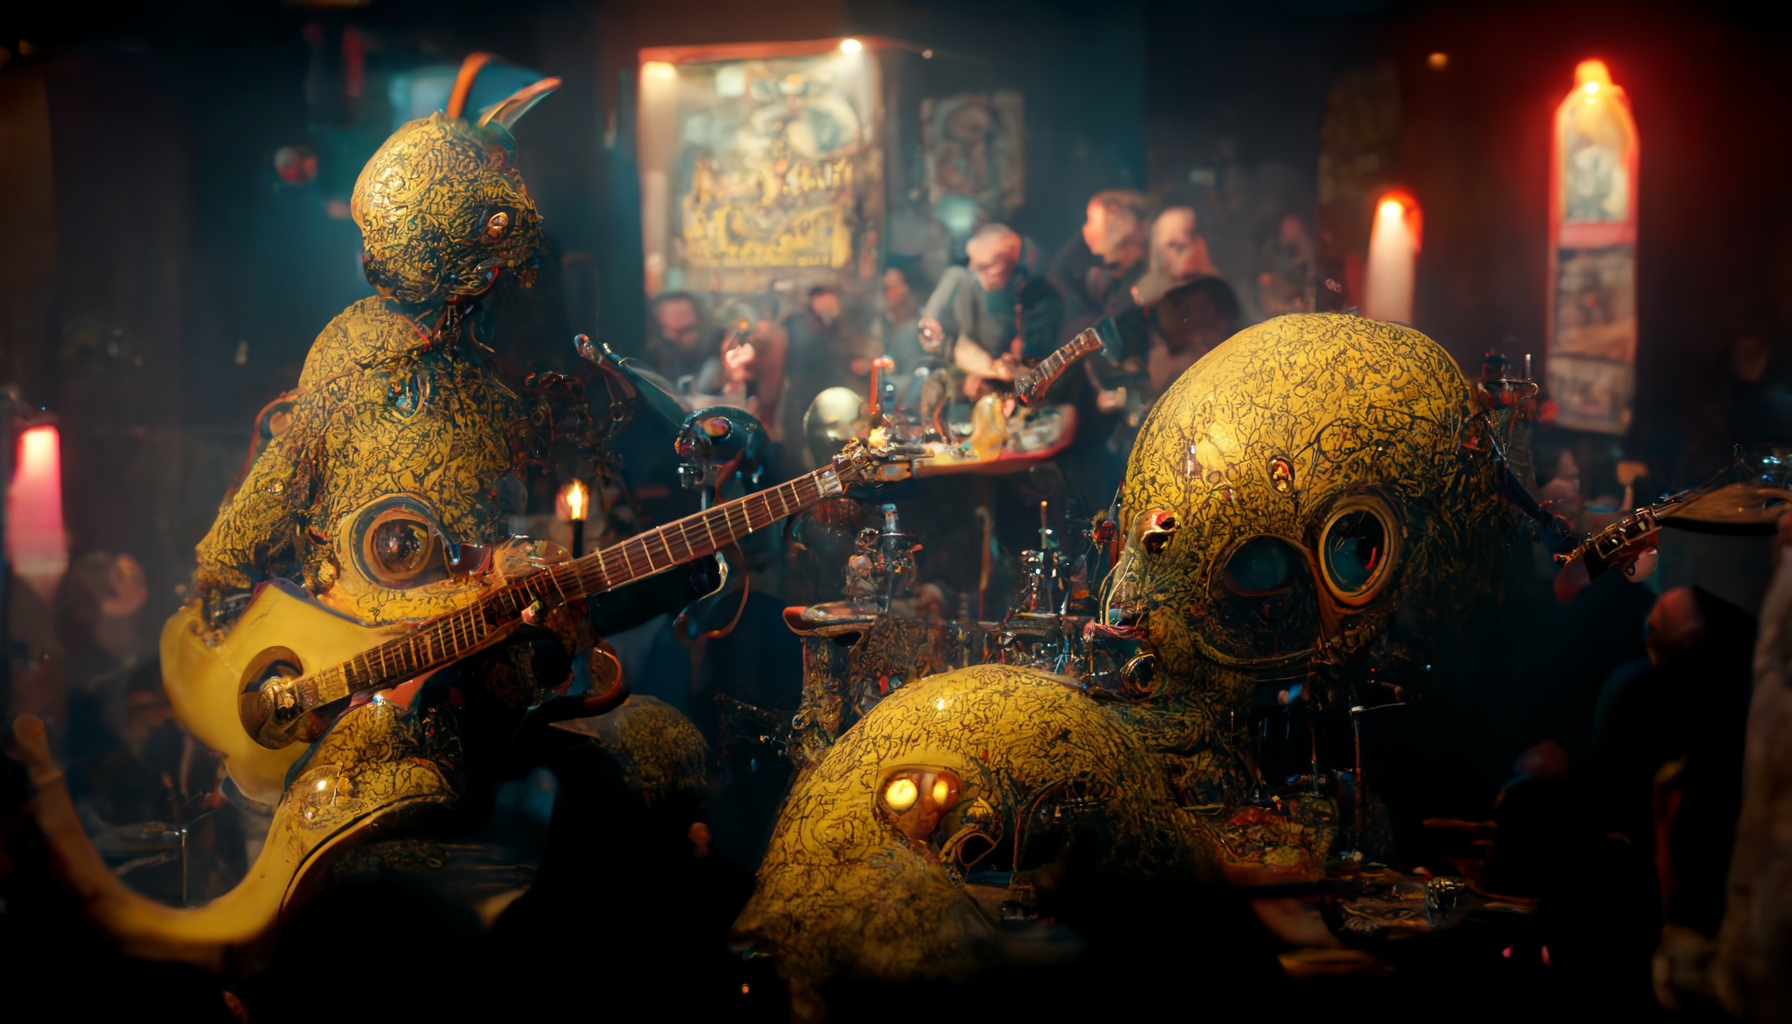 ZenithWombat_A_monster_rock_band_playing_a_gig_in_a_small_bar_i_510f83a9-3545-4354-b1c1-72a9f0b413a0.png